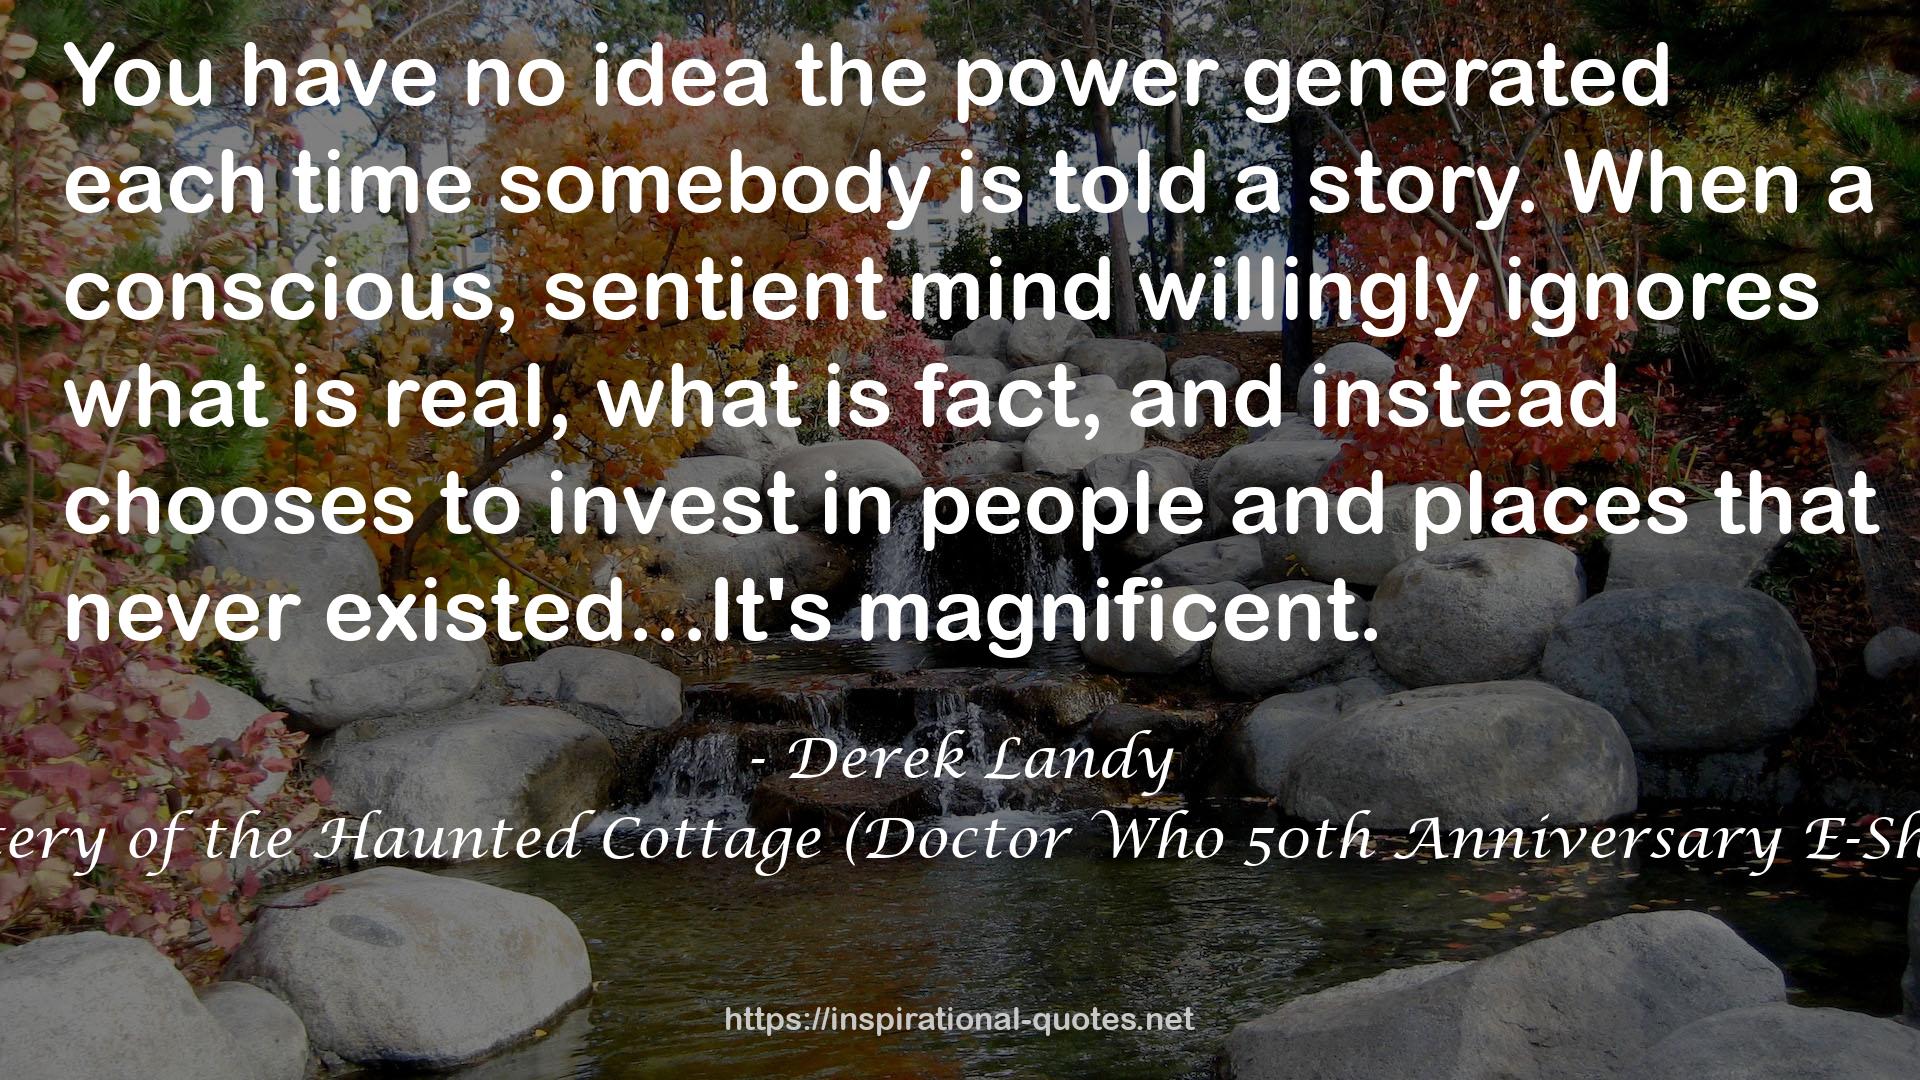 The Mystery of the Haunted Cottage (Doctor Who 50th Anniversary E-Shorts, #10) QUOTES